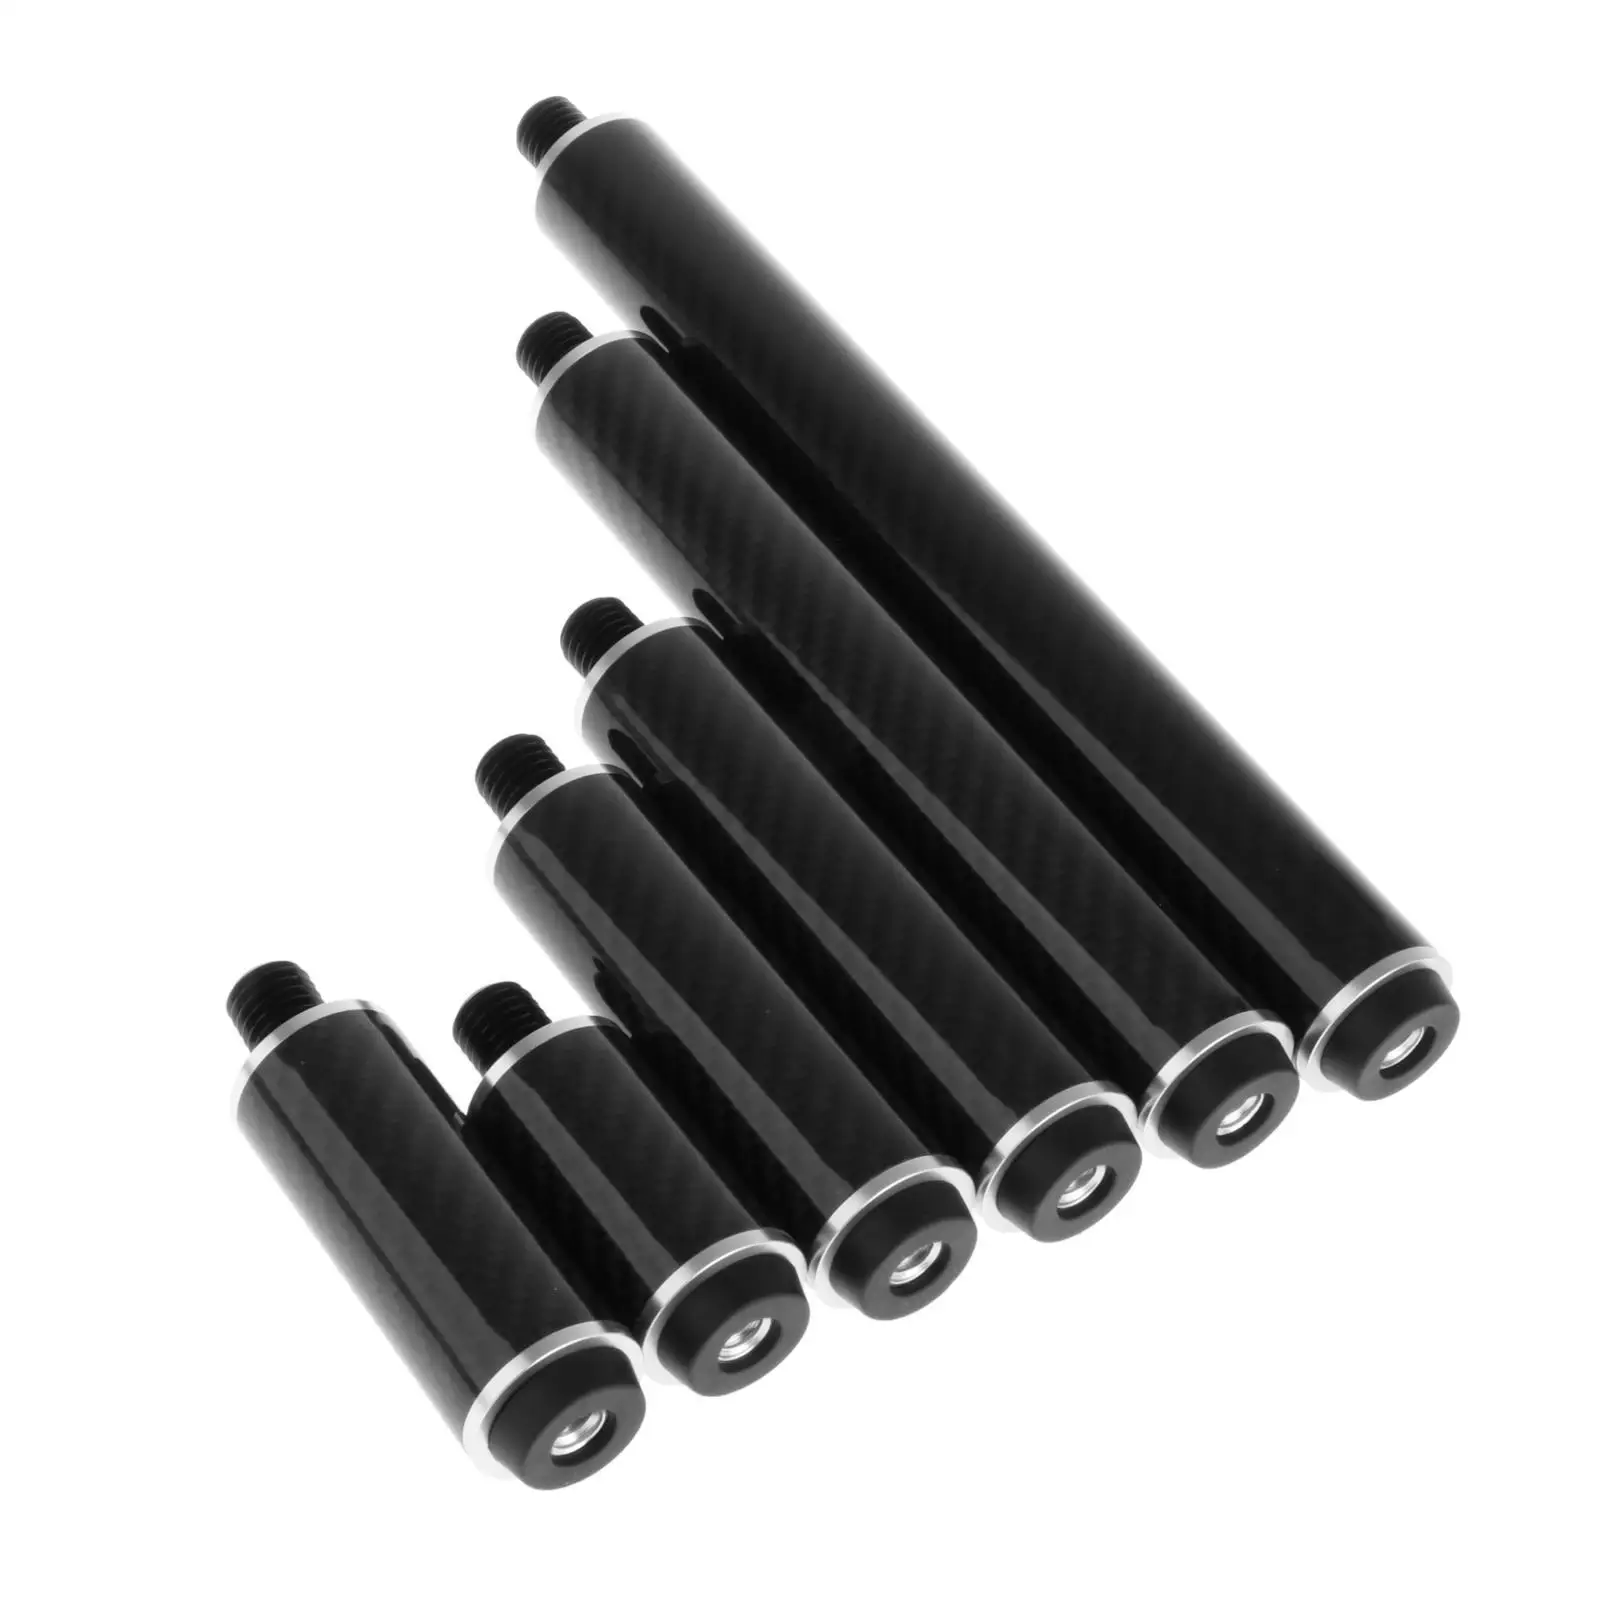 Billiards Pool Cue Extension Enthusiast Games Cue Extension Cue End Extender